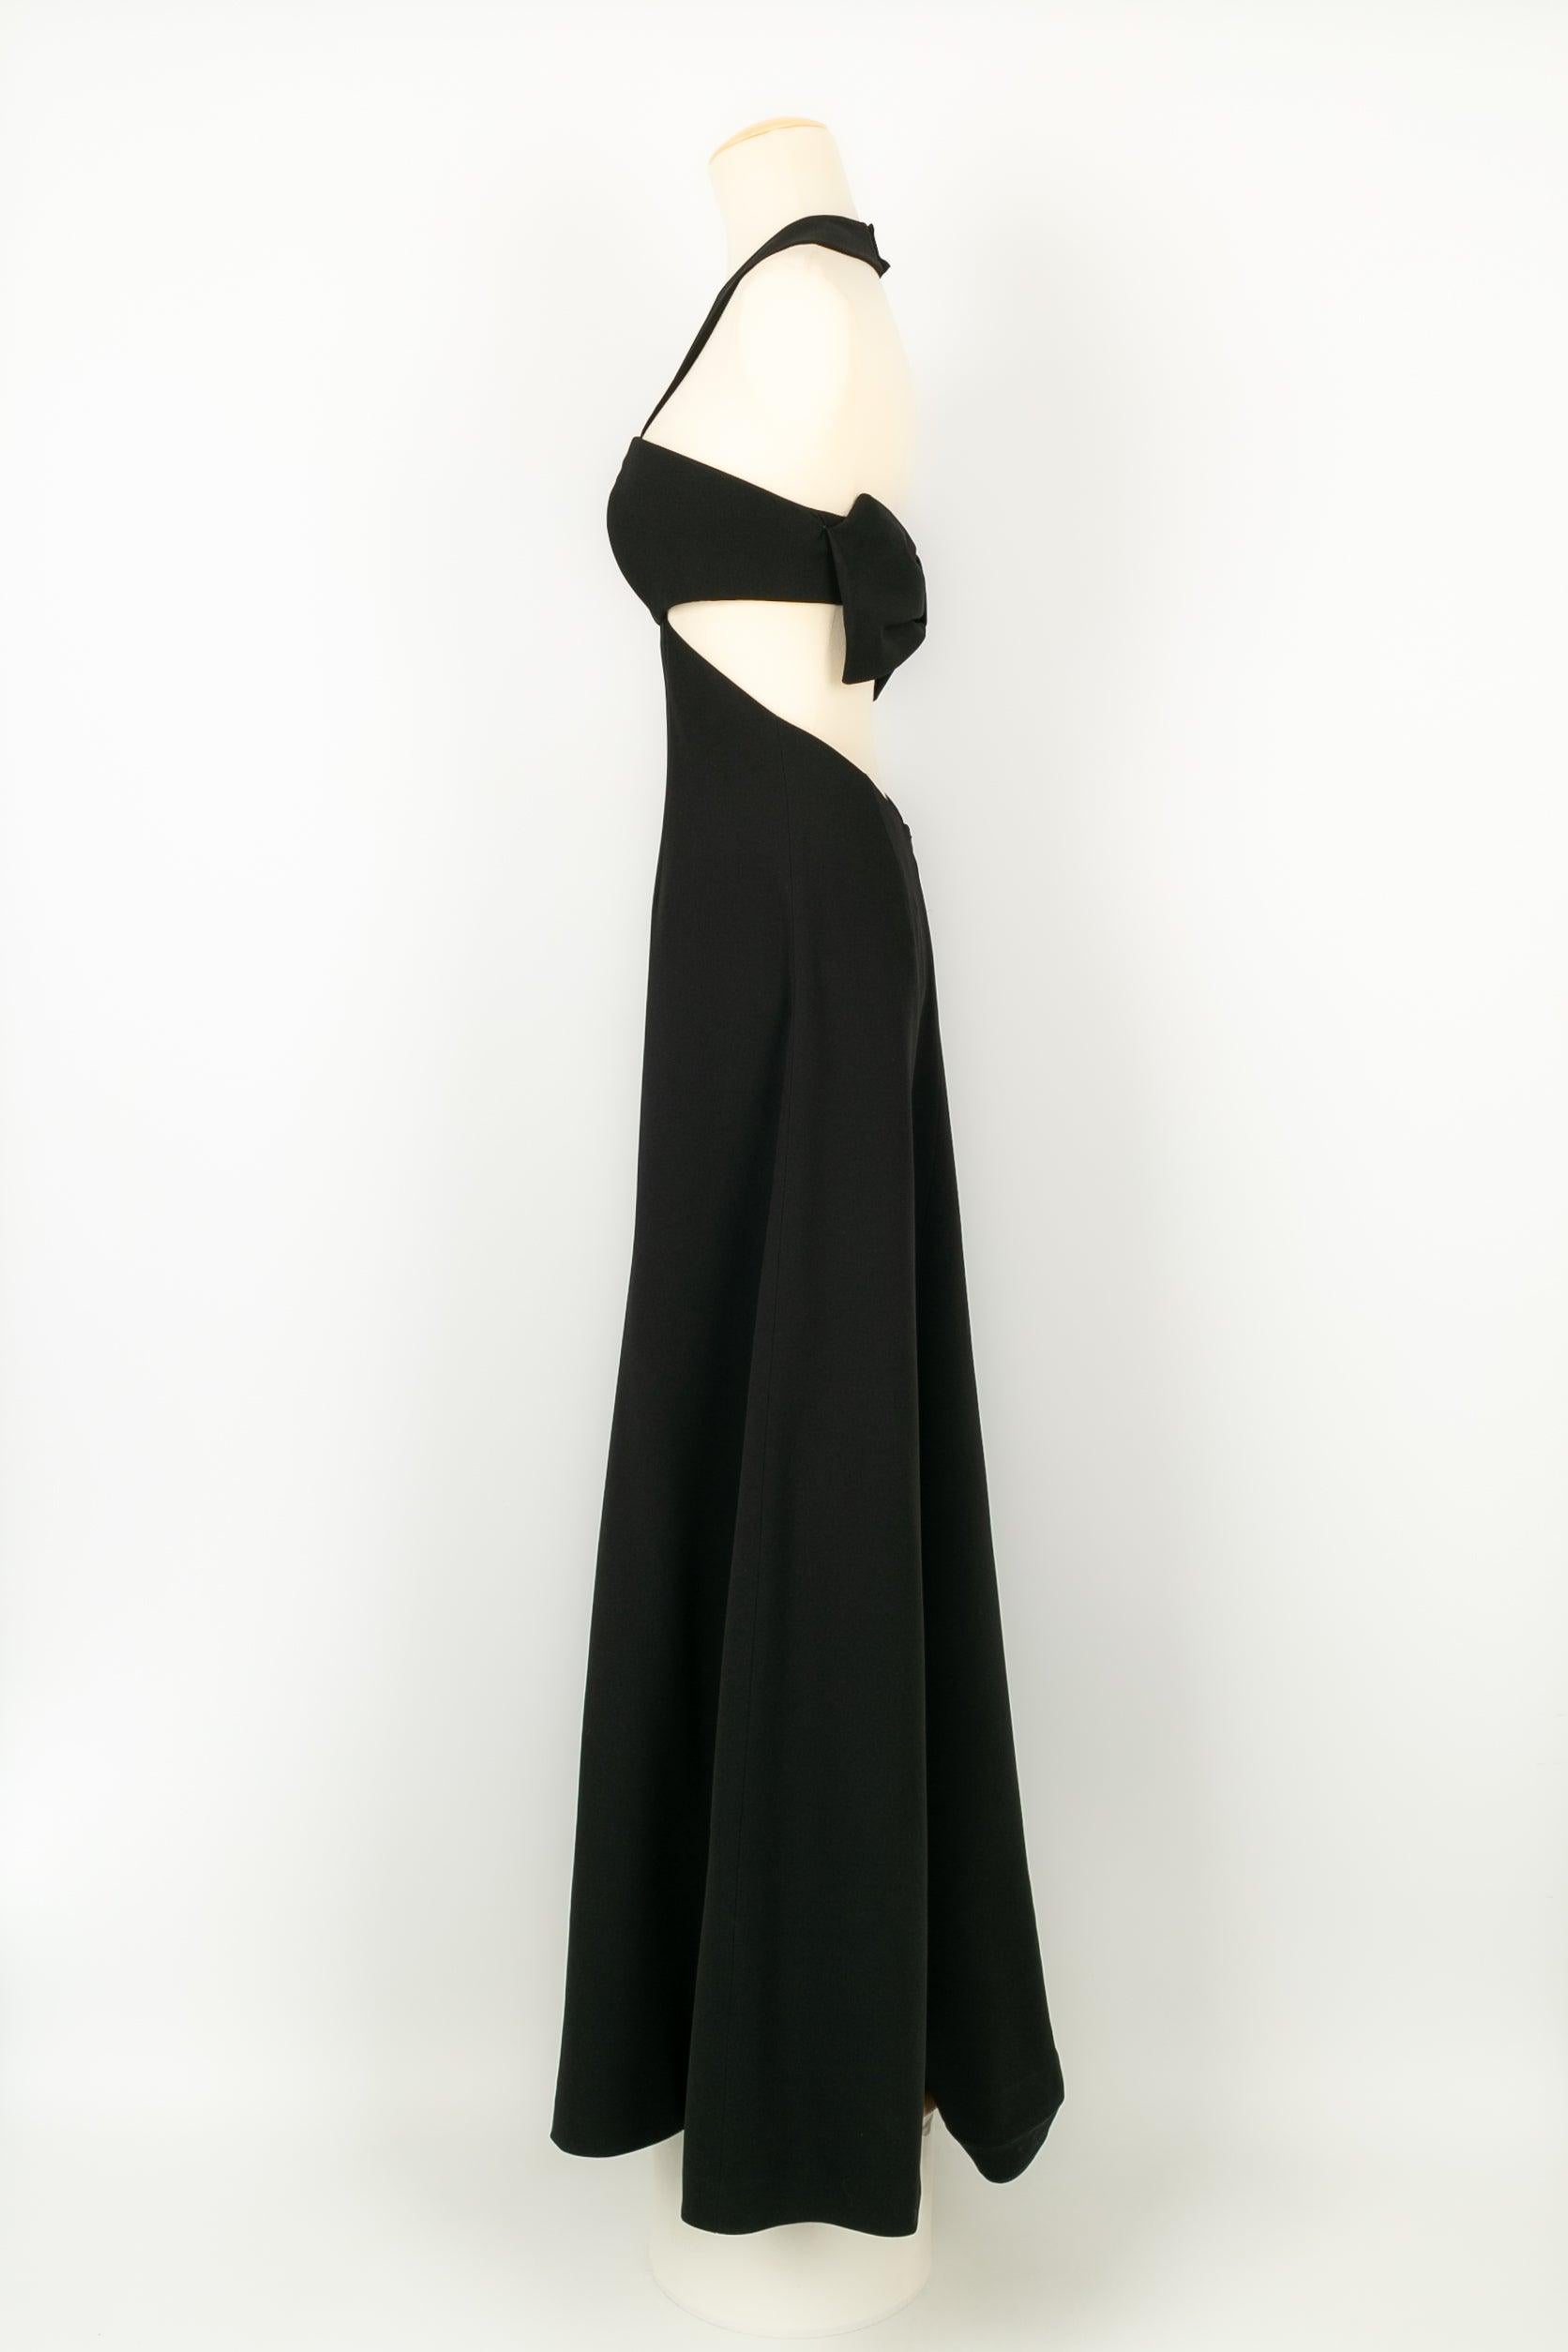 Paule Ka - Black open-back long dress. No size nor composition label, it fits a 36FR.

Additional information:
Condition: Very good condition
Dimensions: Chest: 37 cm - Length: 150 cm

Seller Reference: VR272